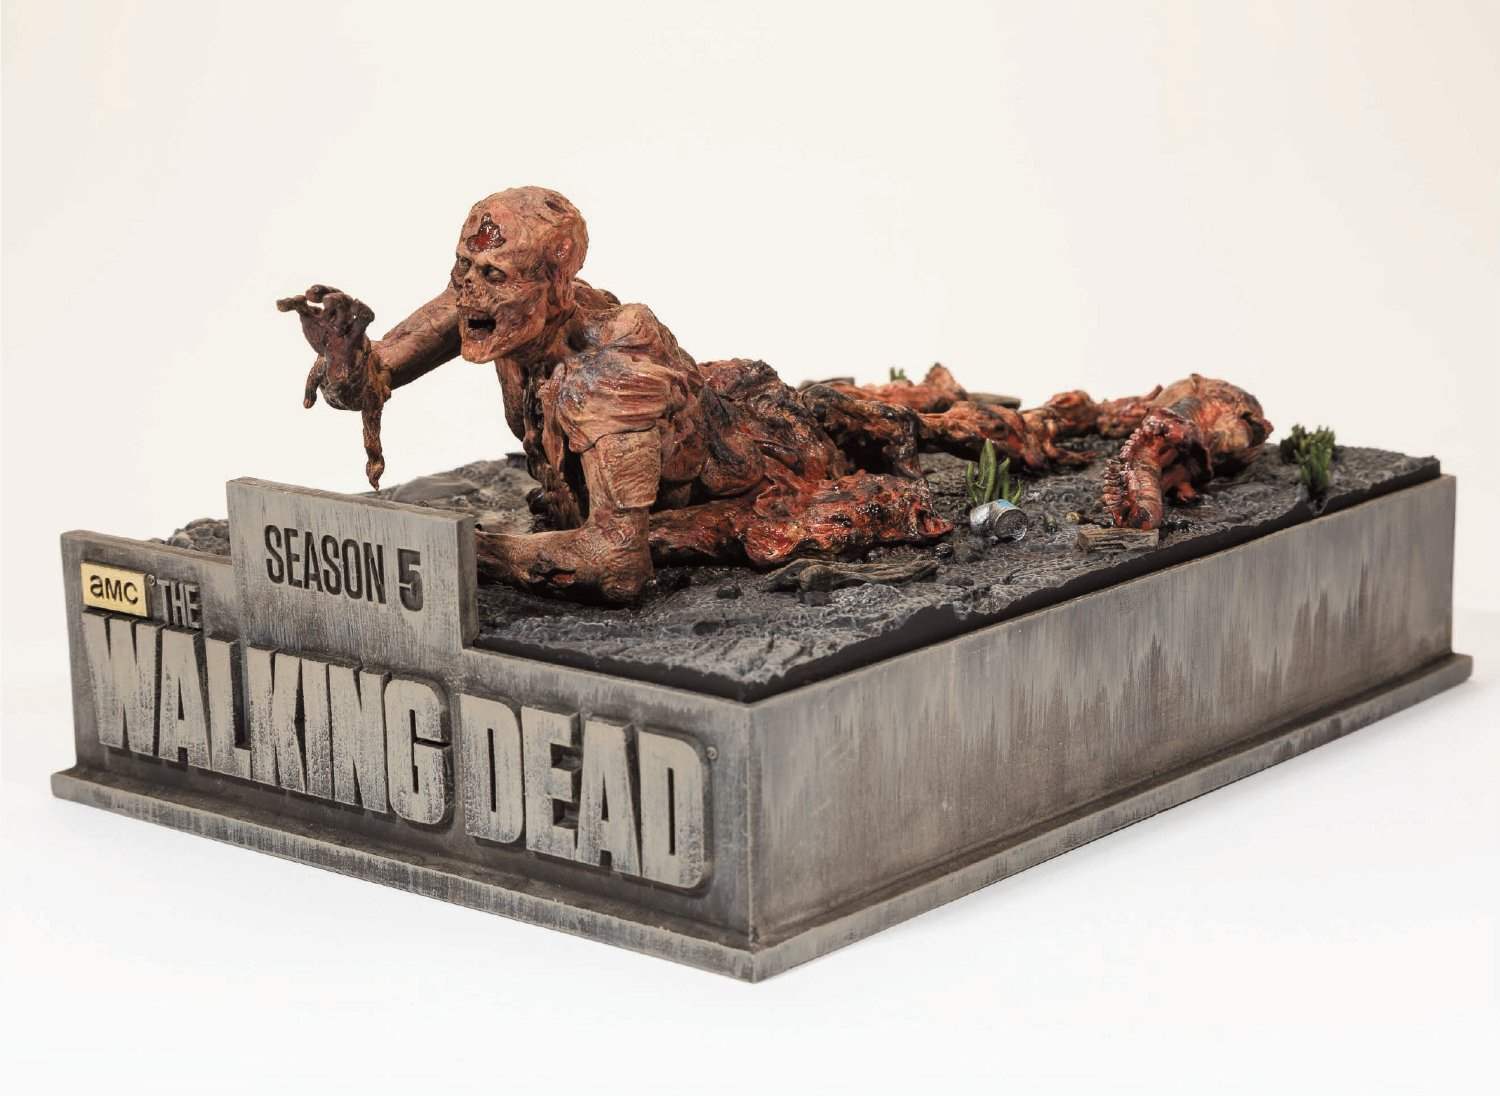 The Limited Edition of The Walking Dead Season 5 Blu Ray, created by McFarlane Toys